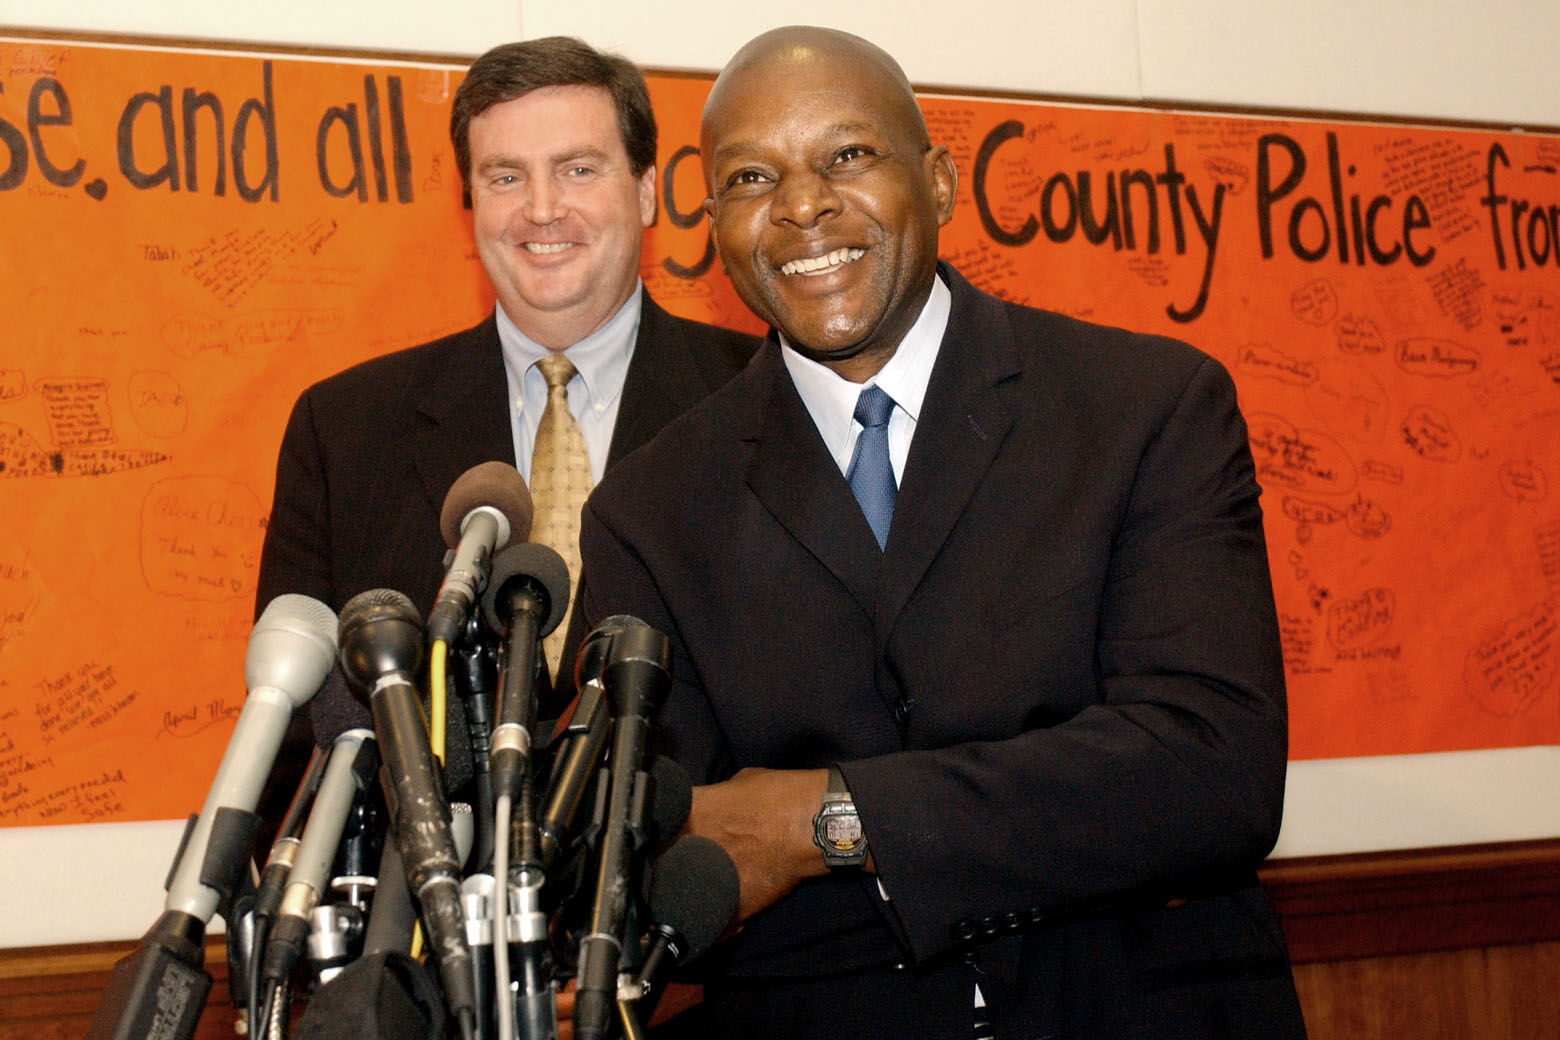 ROCKVILLE, MD - JULY 10:  Former Montgomery County Police Chief Charles Moose (R) speaks at a news conference  with County Executive Douglas M. Duncan July 10, 2003 in Rockville, Maryland.  Moose was at the forefront of the Washington, D.C. sniper case in October 2002 and recently stepped down from his duties after an ethics committee decided that his plans to write a book about the sniper case was a conflict of interest.  (Photo by Stephen J. Boitano/Getty Images)